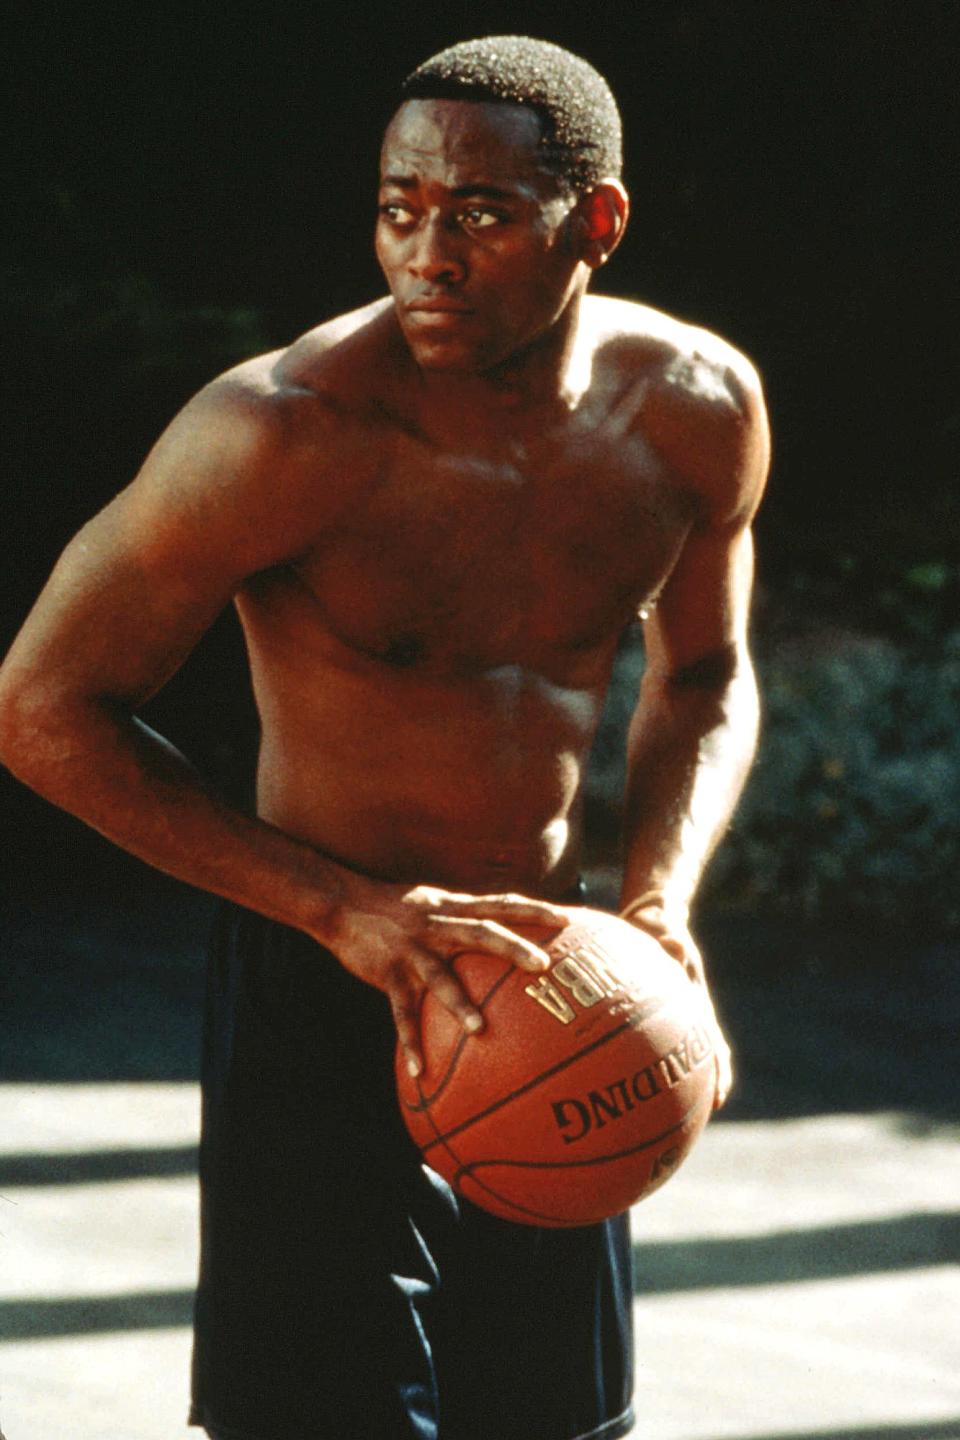 Omar Epps as Quincy McCall in Love & Basketball